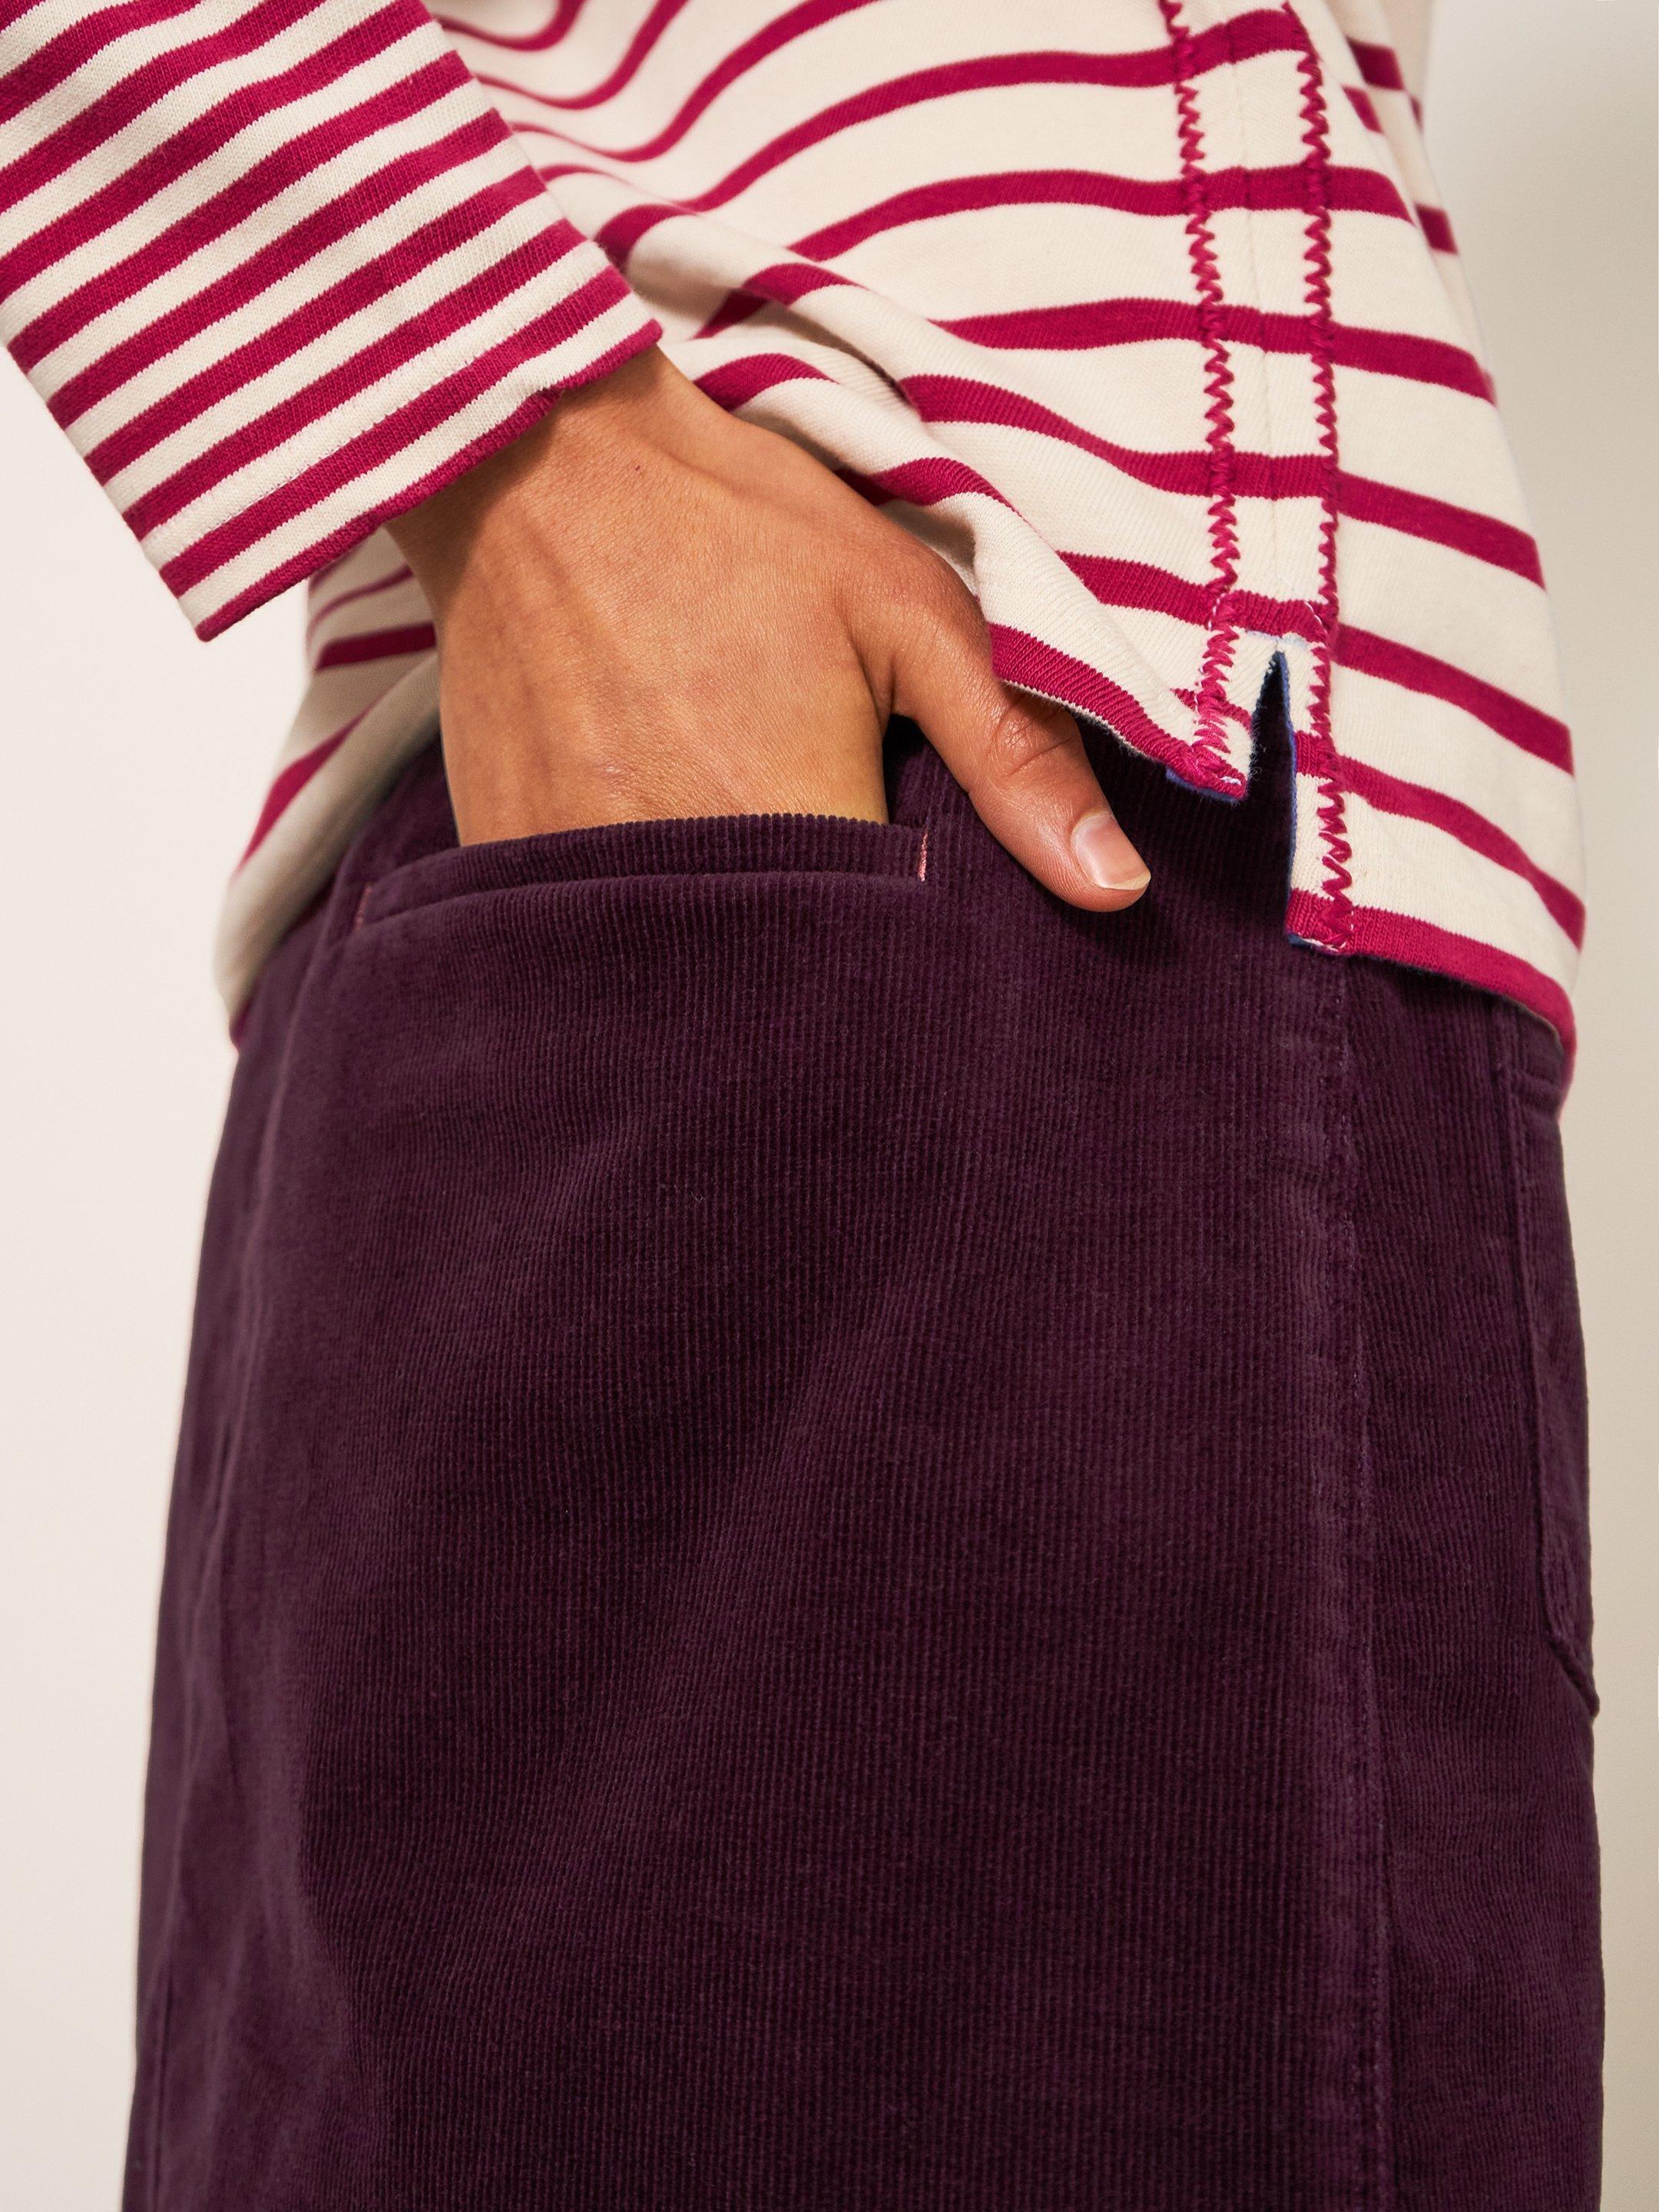 Melody Organic Cord Skirt in DK PLUM - MODEL FRONT